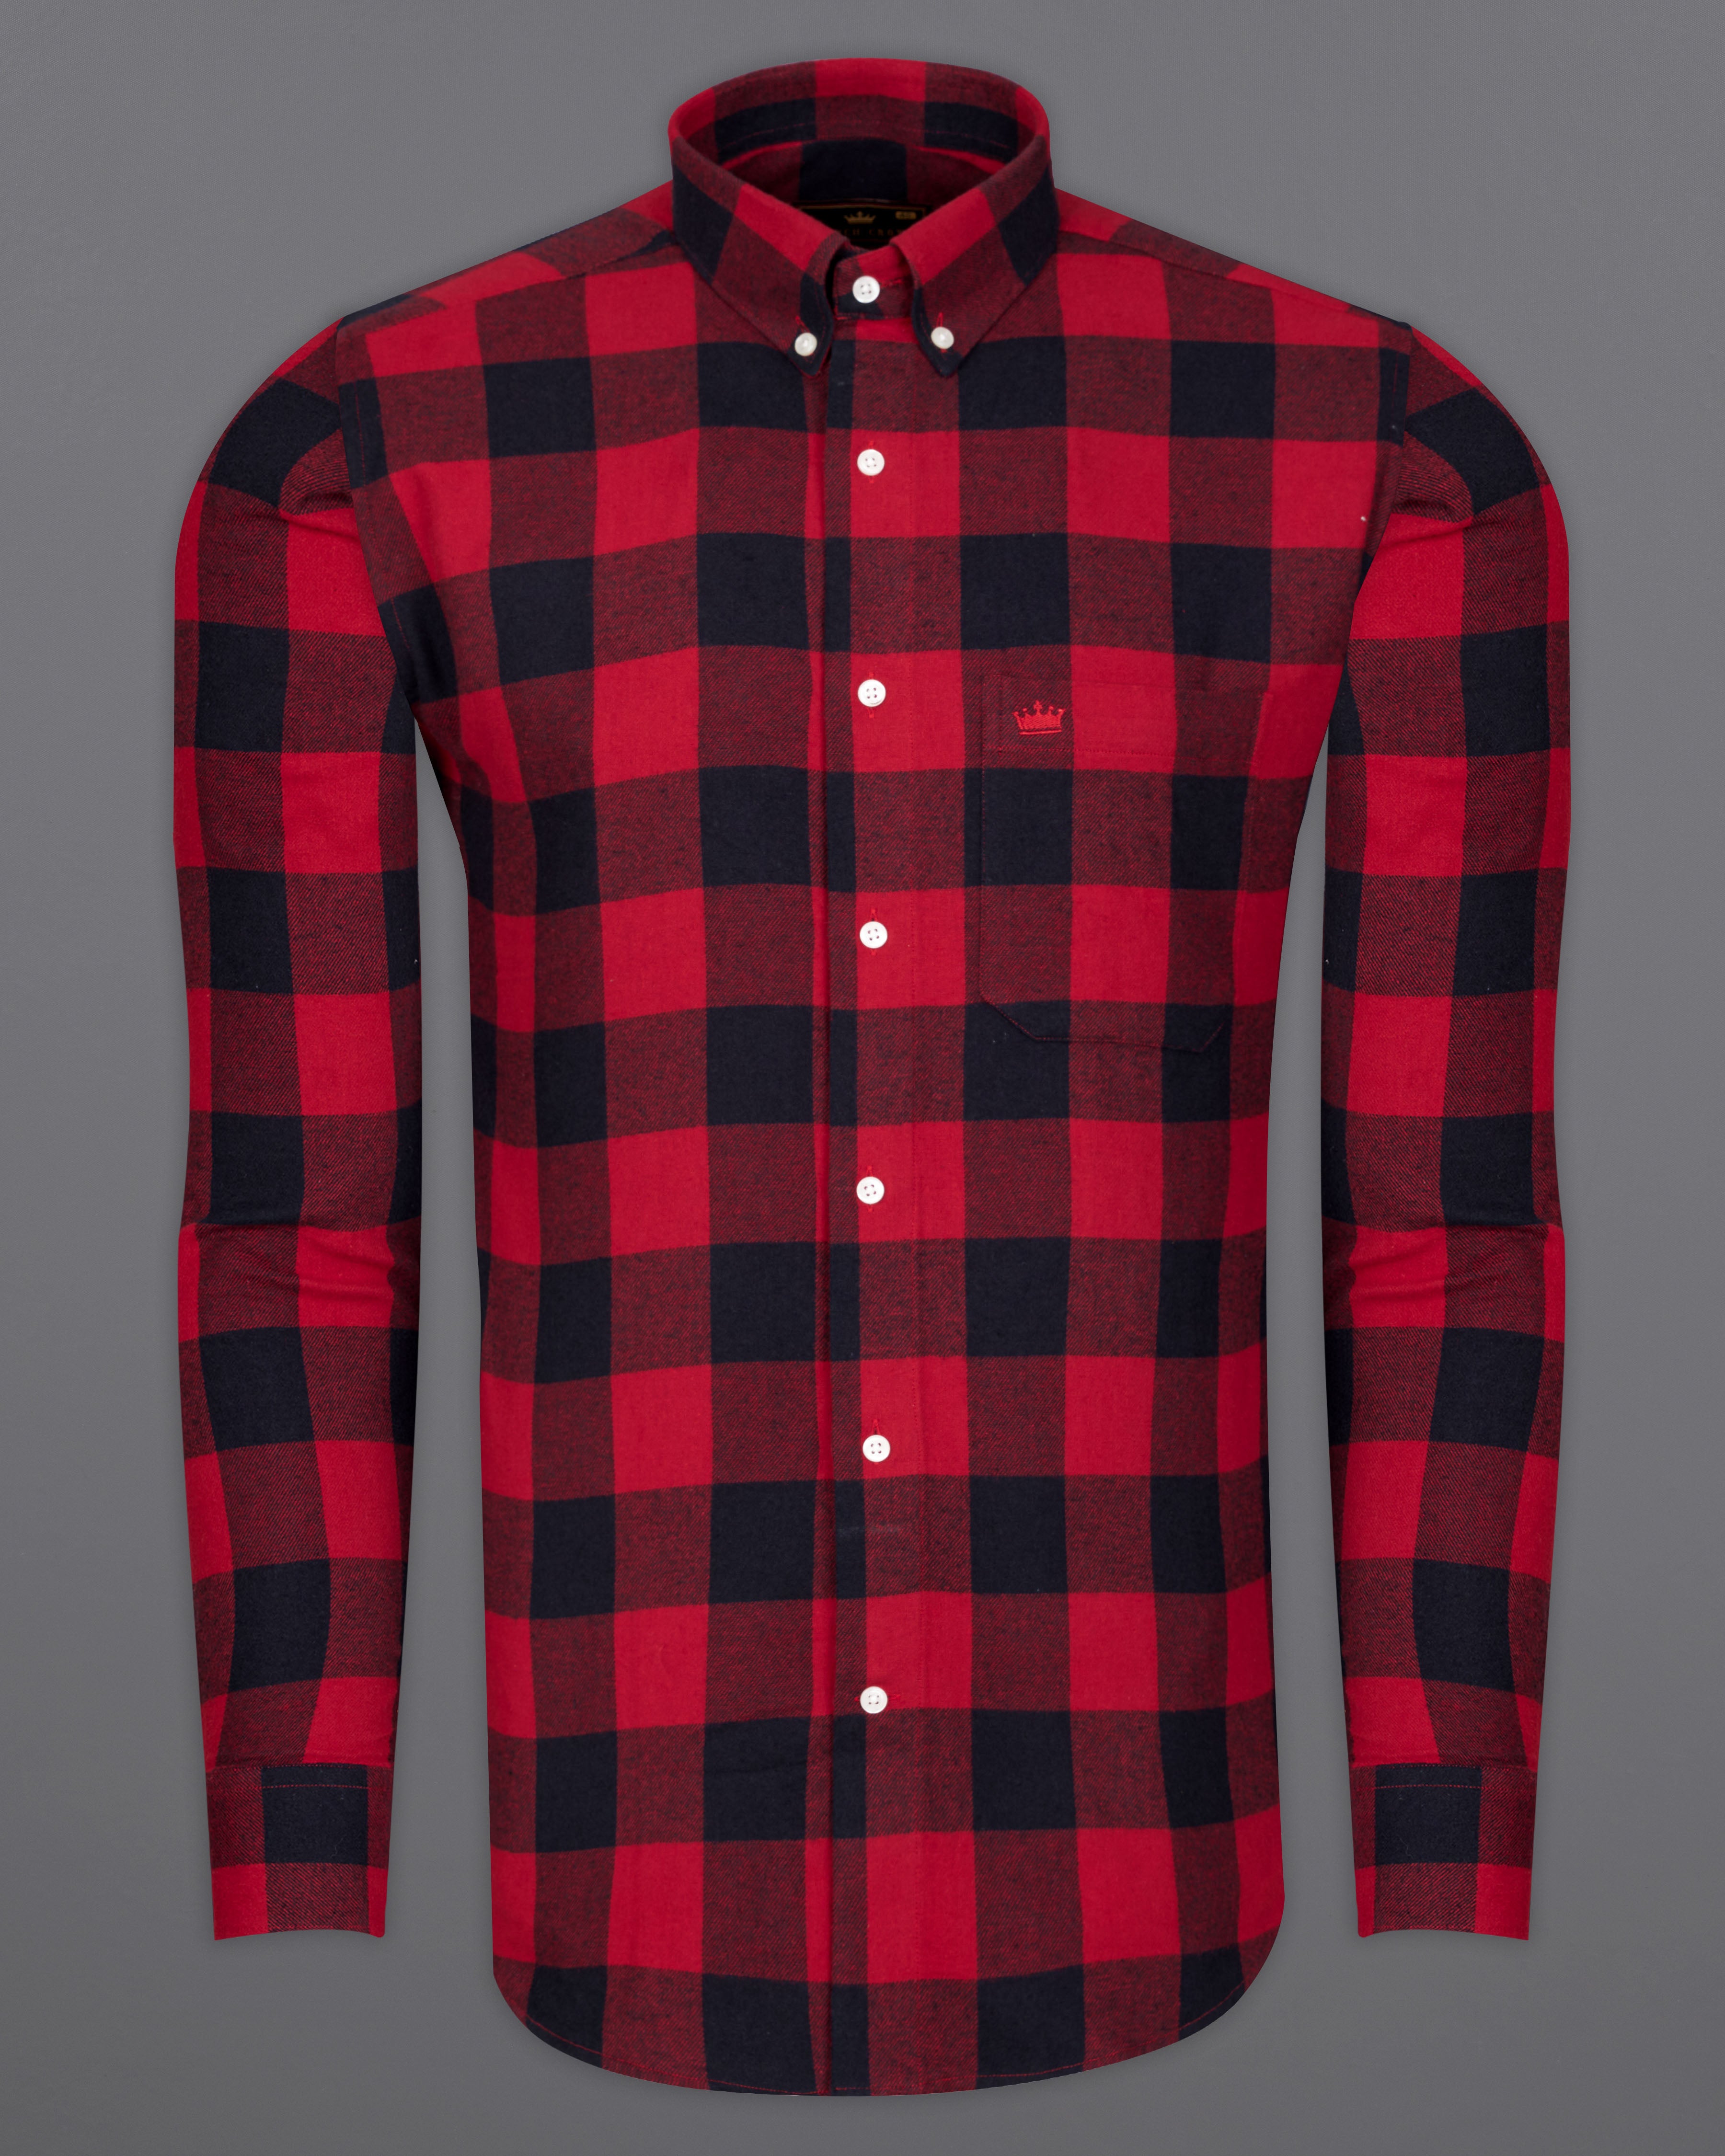 Carmine Red and Black Checked Flannel Overshirt/Shacket 9458-BD-OS-38, 9458-BD-OS-H-38, 9458-BD-OS-39, 9458-BD-OS-H-39, 9458-BD-OS-40, 9458-BD-OS-H-40, 9458-BD-OS-42, 9458-BD-OS-H-42, 9458-BD-OS-44, 9458-BD-OS-H-44, 9458-BD-OS-46, 9458-BD-OS-H-46, 9458-BD-OS-48, 9458-BD-OS-H-48, 9458-BD-OS-50, 9458-BD-OS-H-50, 9458-BD-OS-52, 9458-BD-OS-H-52